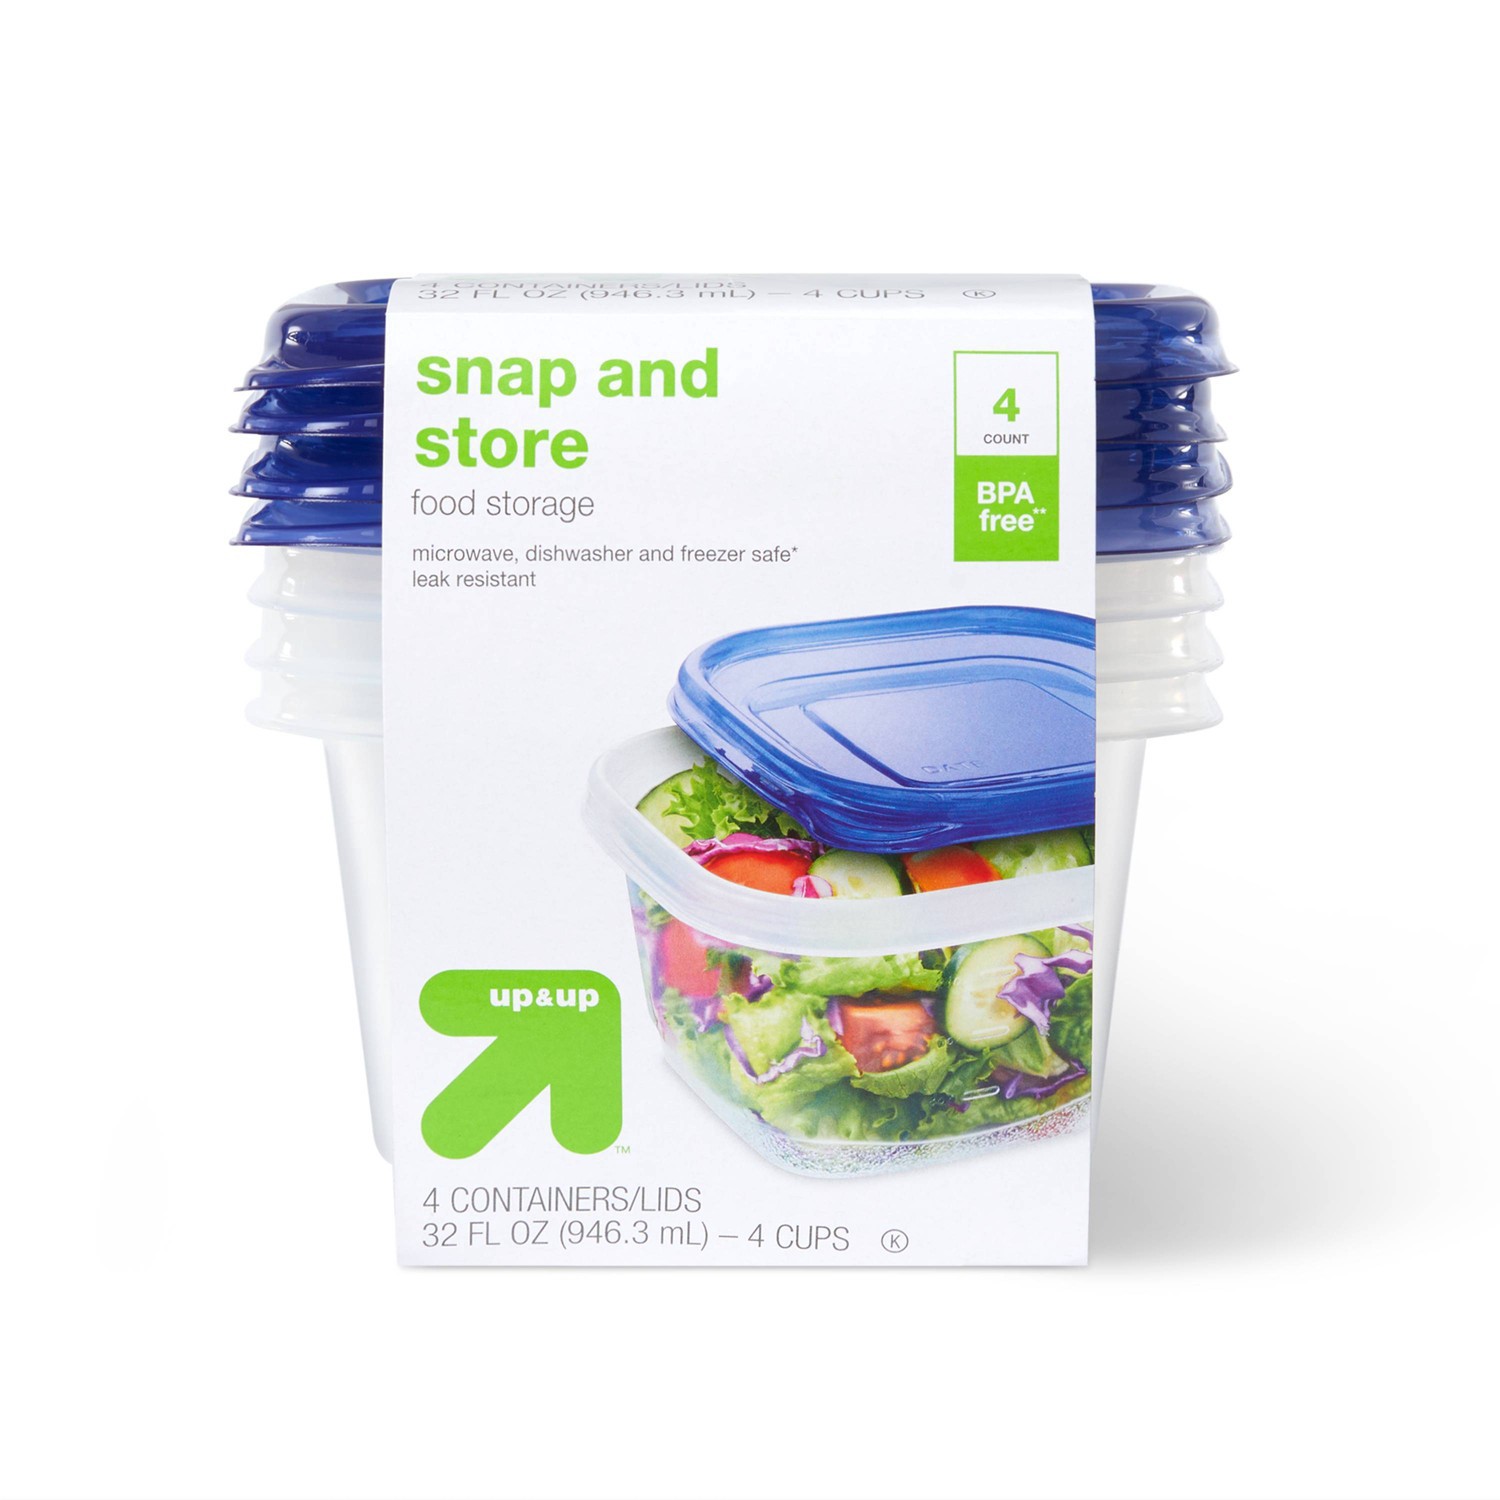 slide 1 of 3, Snap and Store Medium Square Food Storage Container - 4ct/32 fl oz - up & up, 4 ct; 32 fl oz